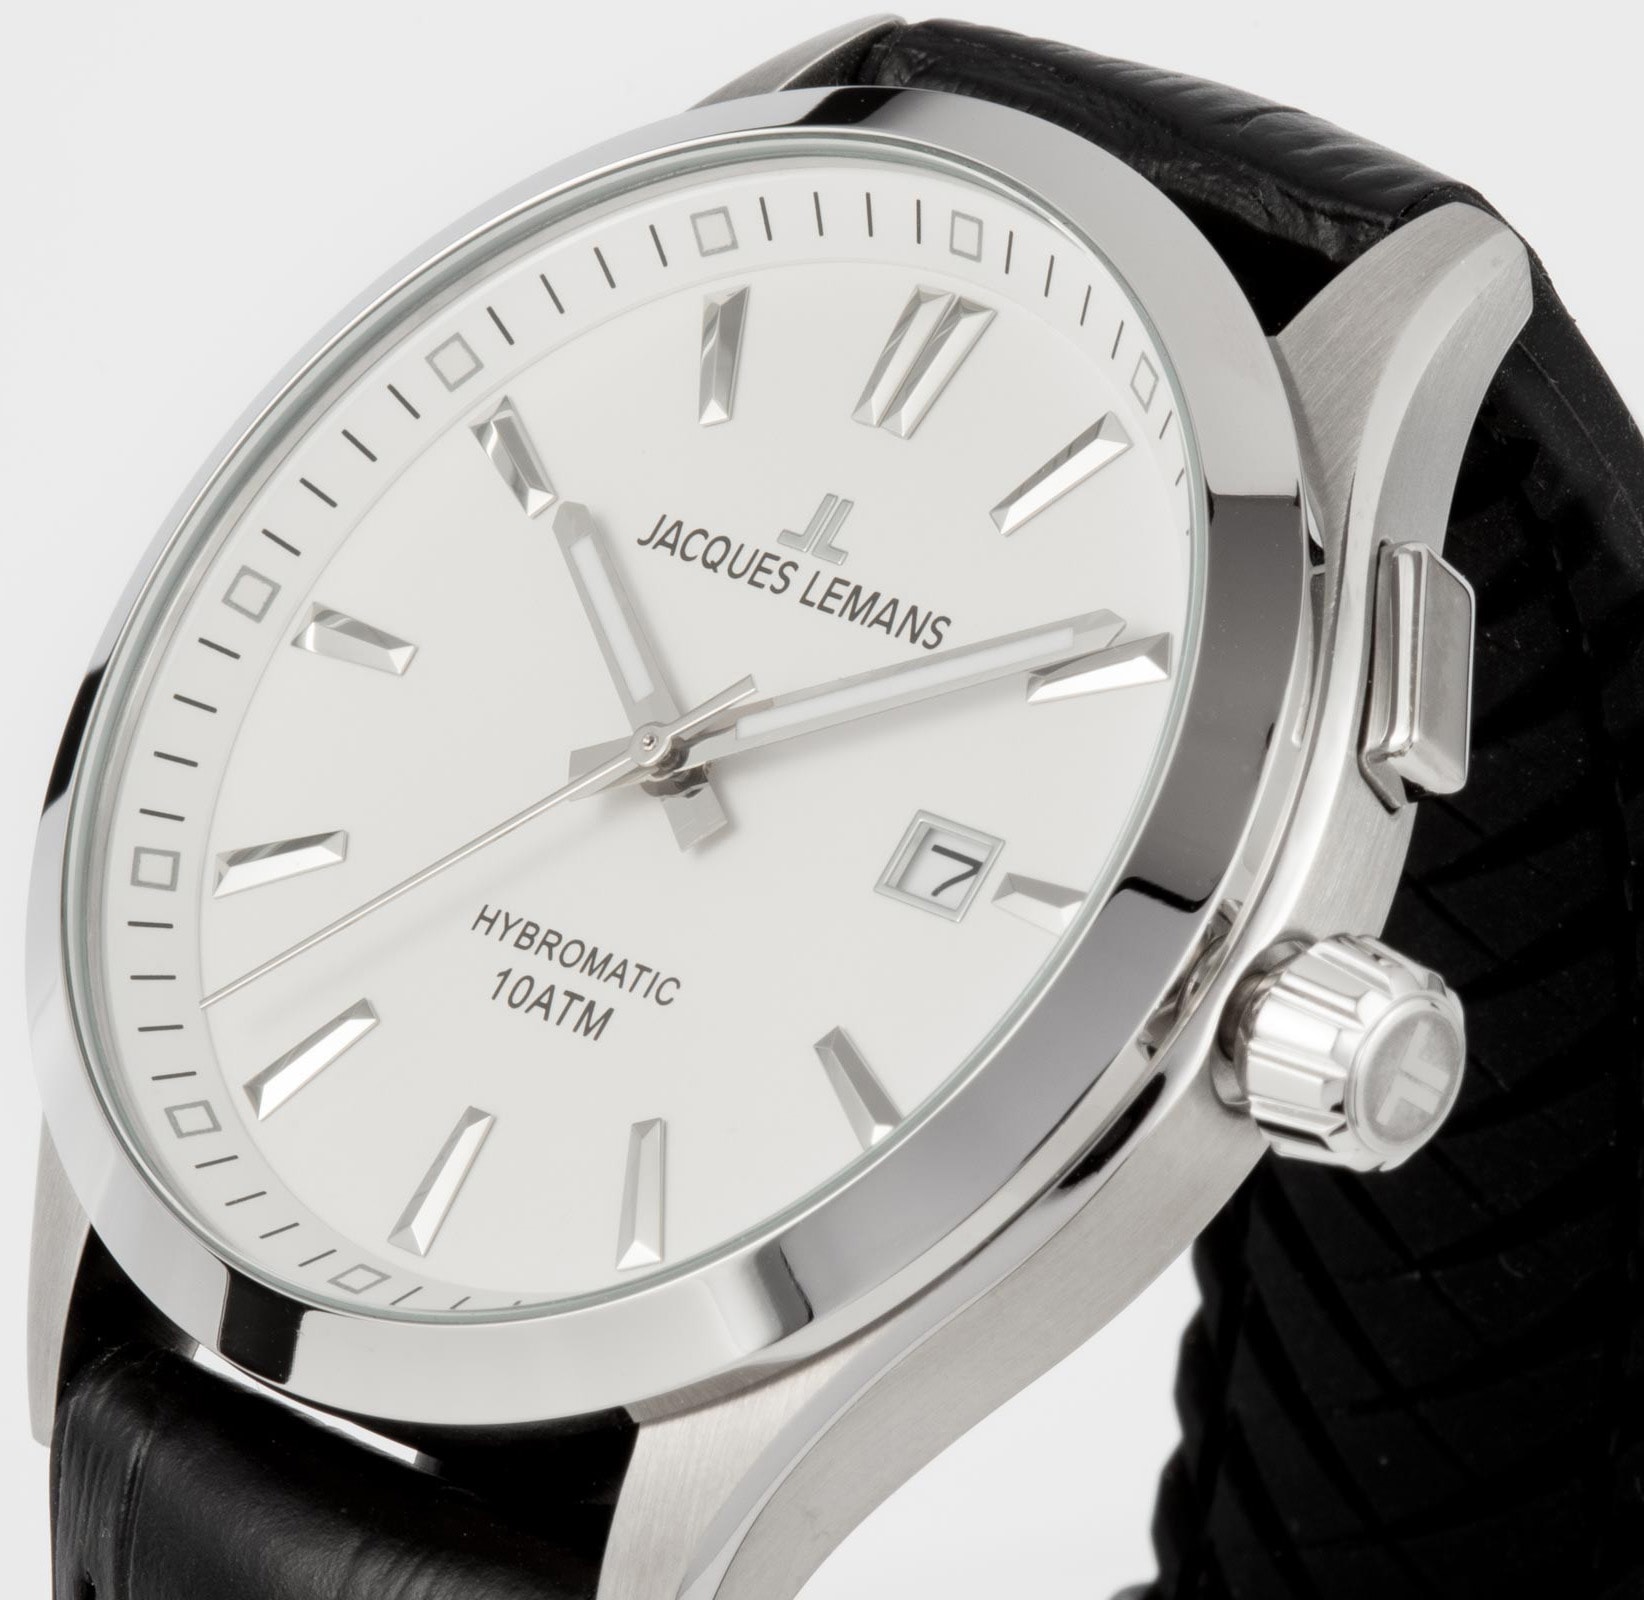 Jacques Lemans Kineticuhr »Hybromatic, 1-2130B« bei ♕